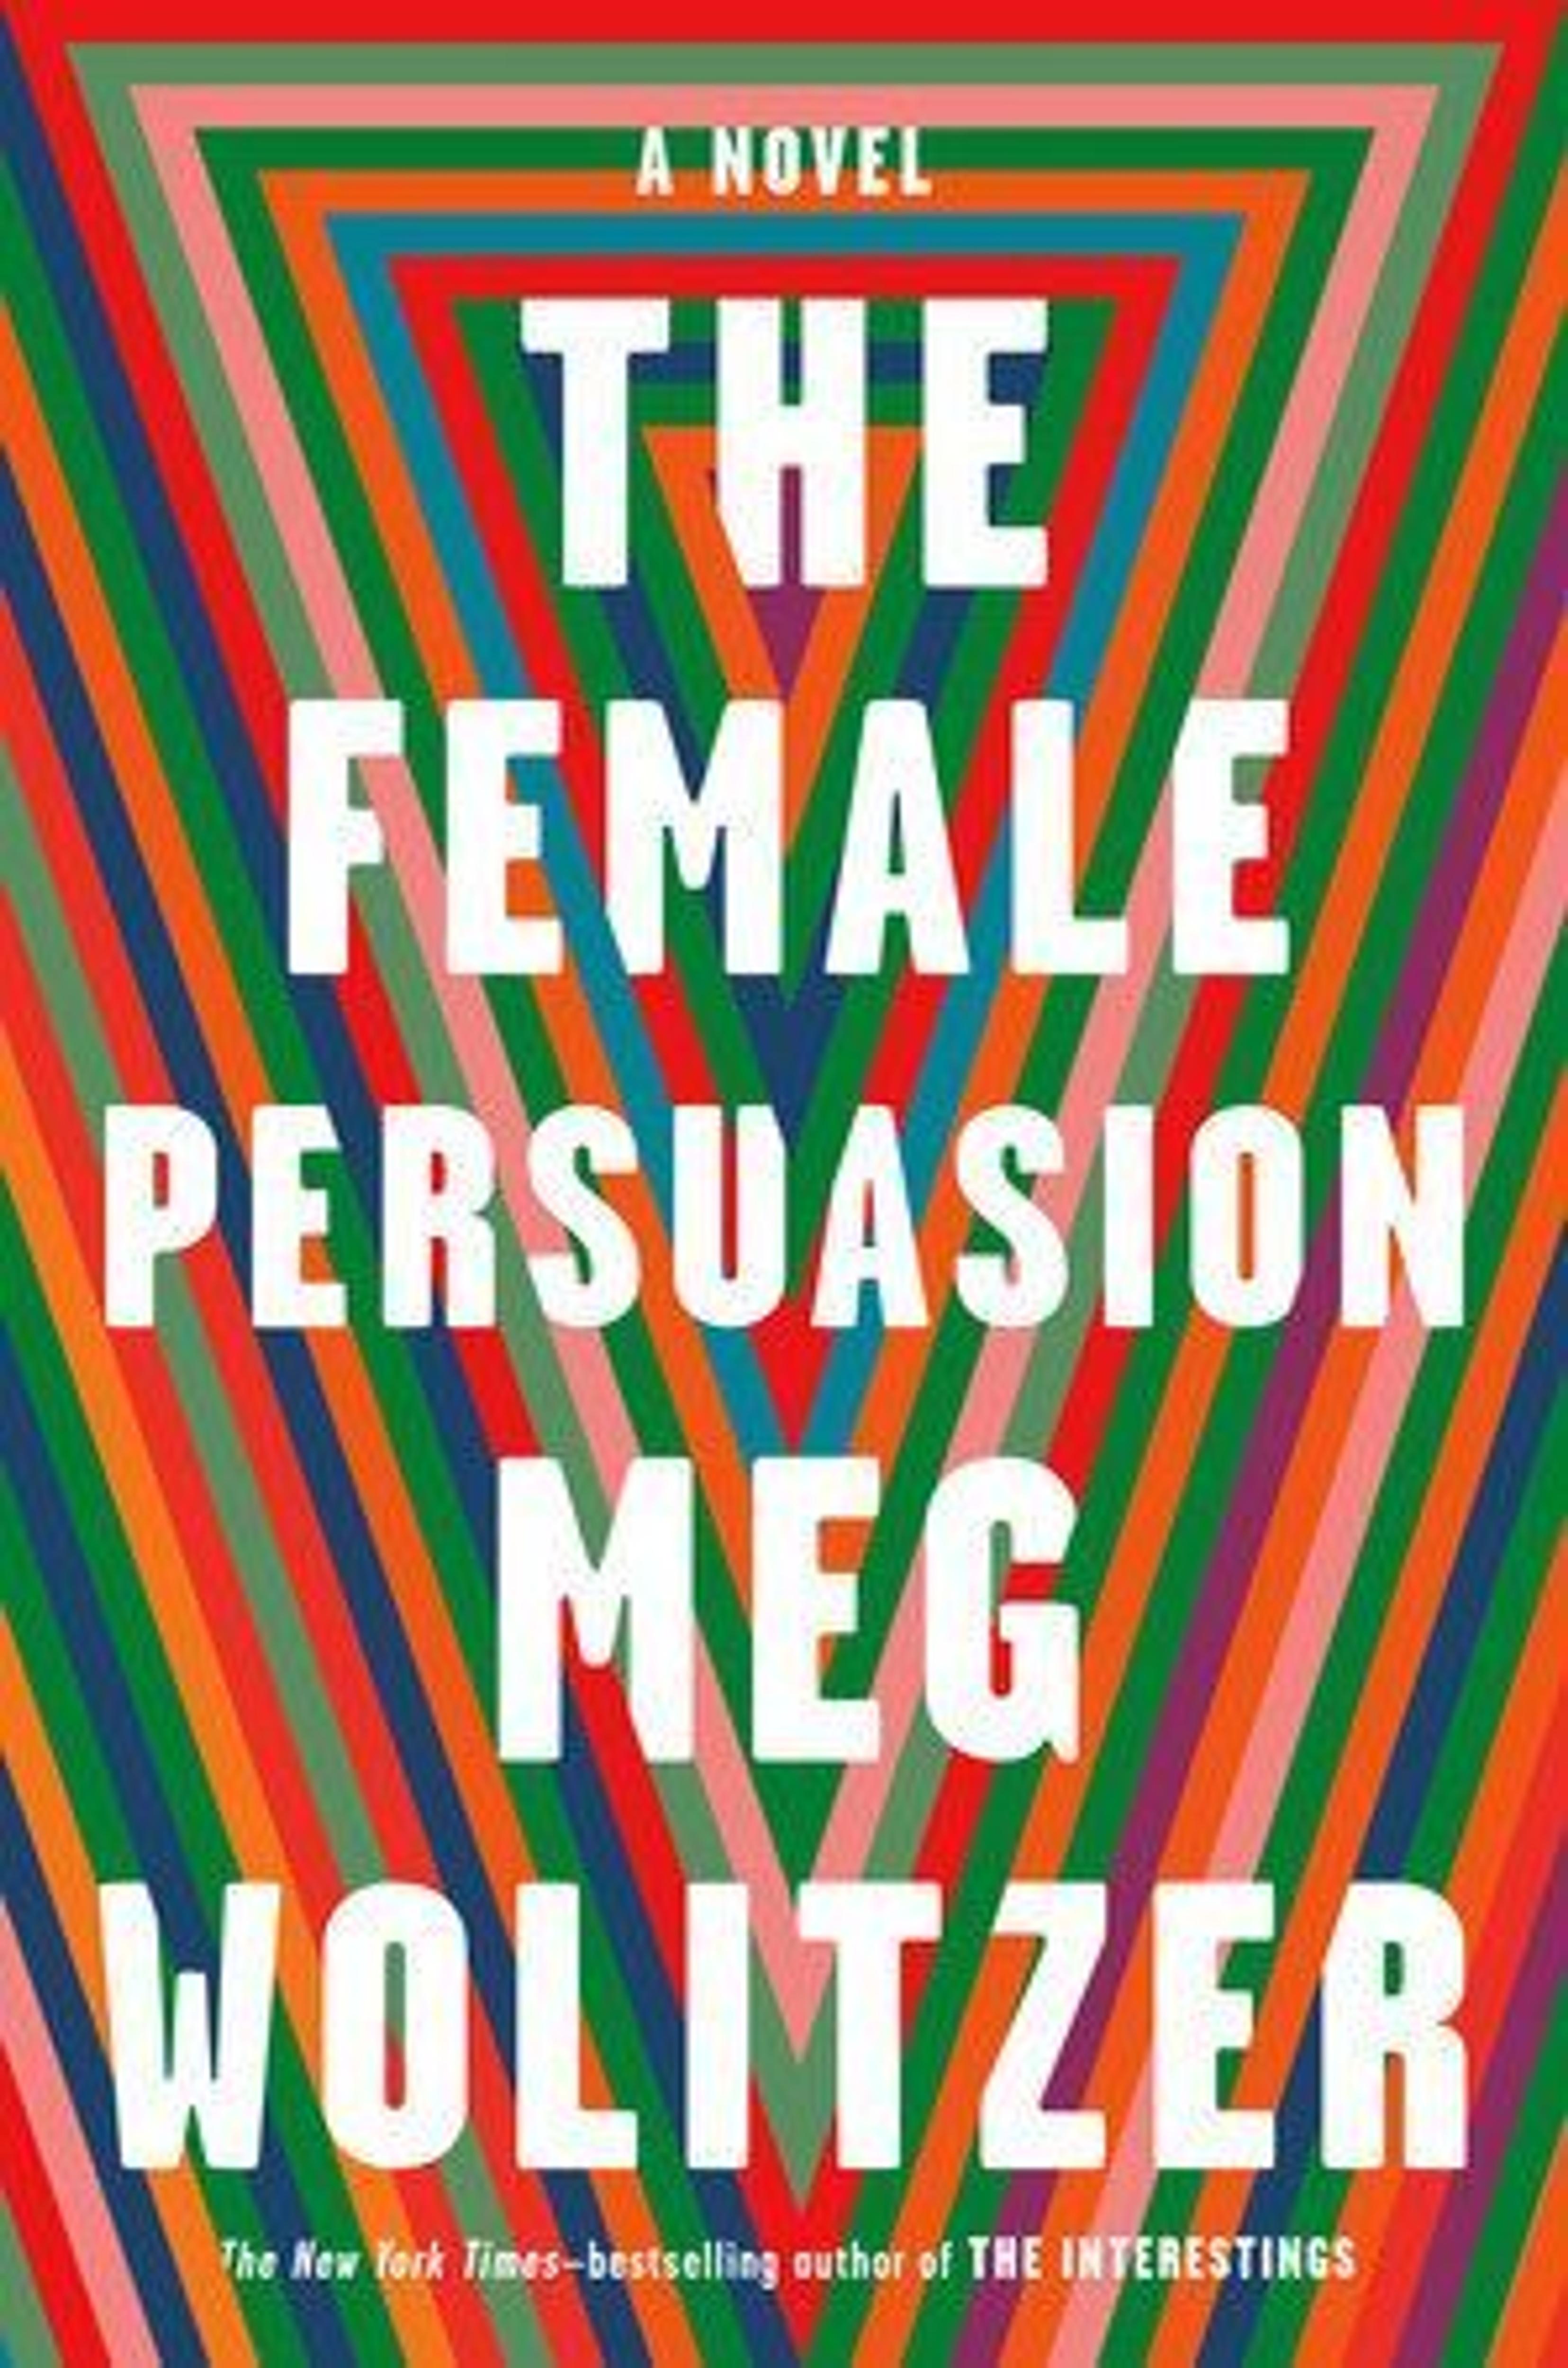 Whose Feminism Is It Anyway? Meg Wolitzer’s “The Female Persuasion”